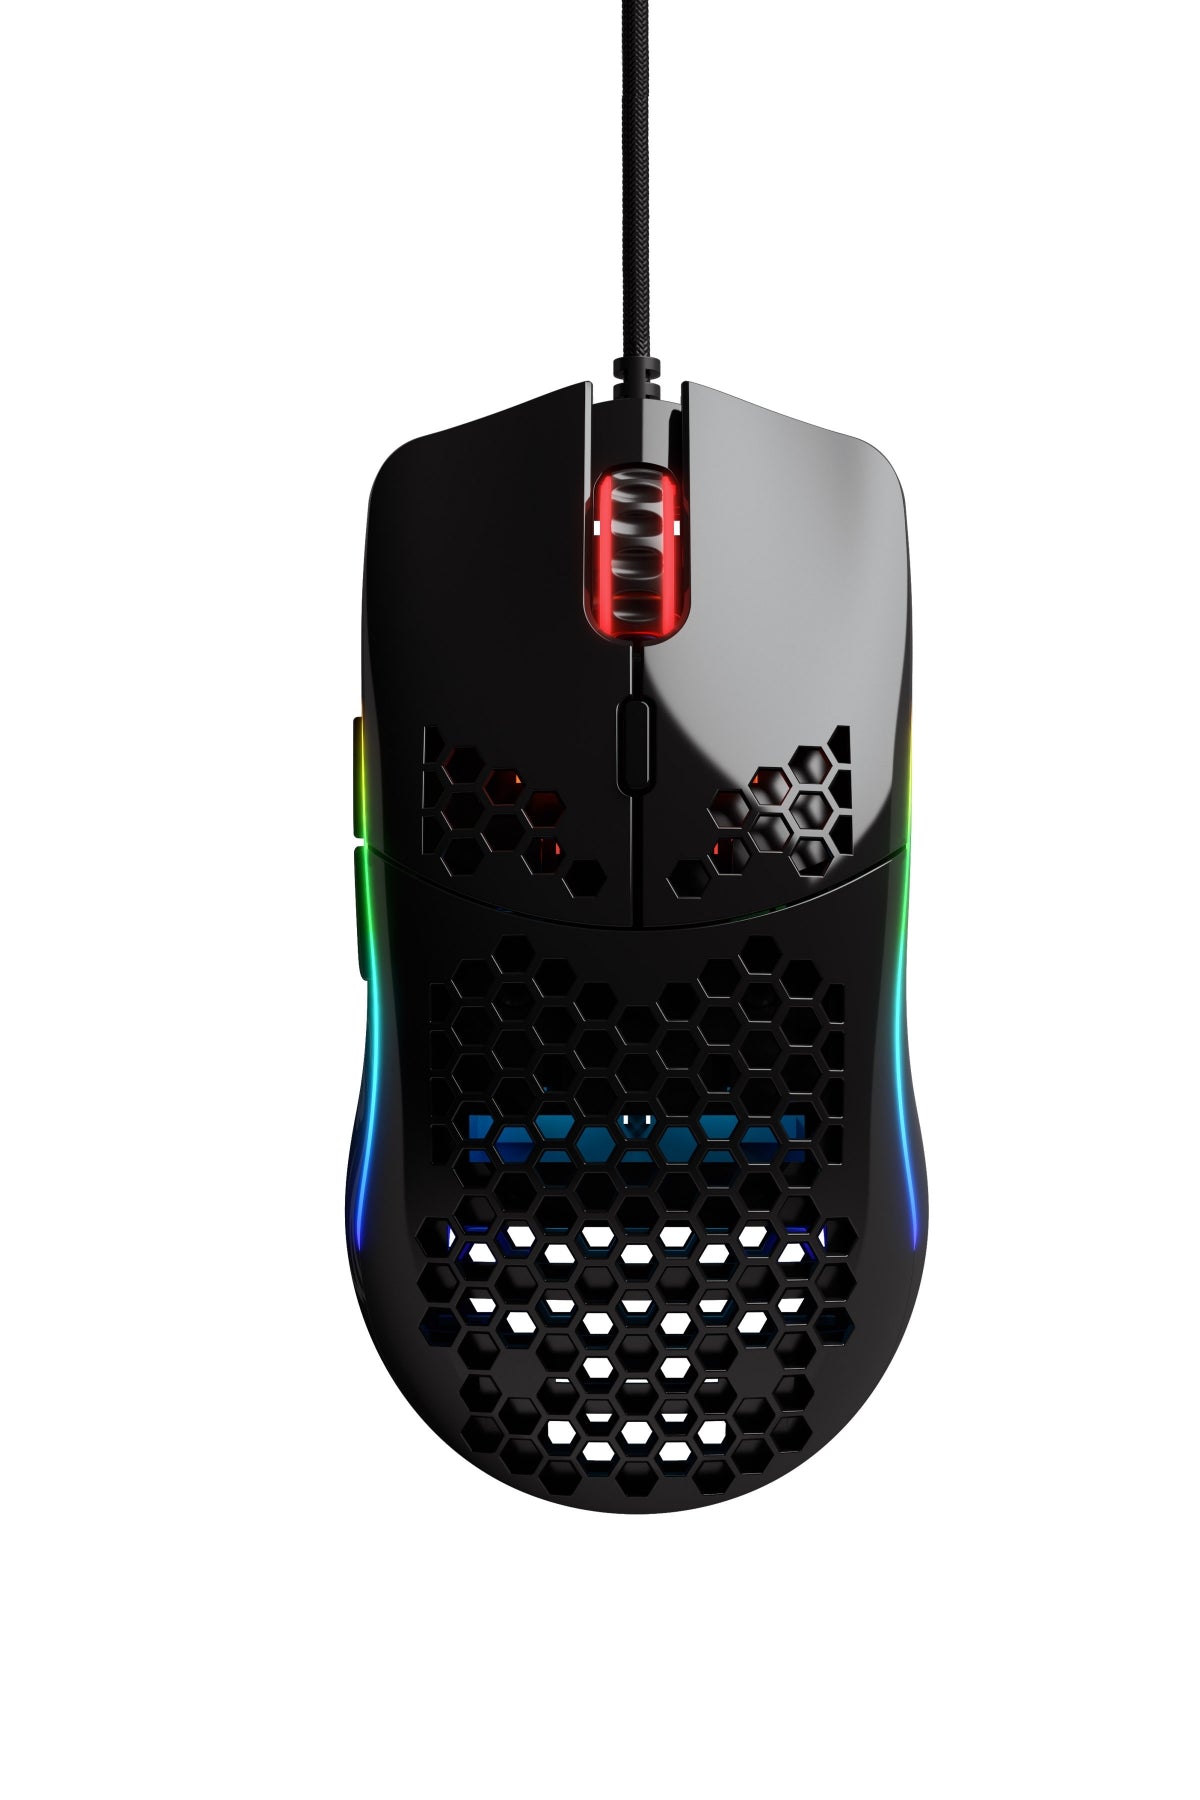 Glorious Model O Minus Glossy Black Gaming Mouse